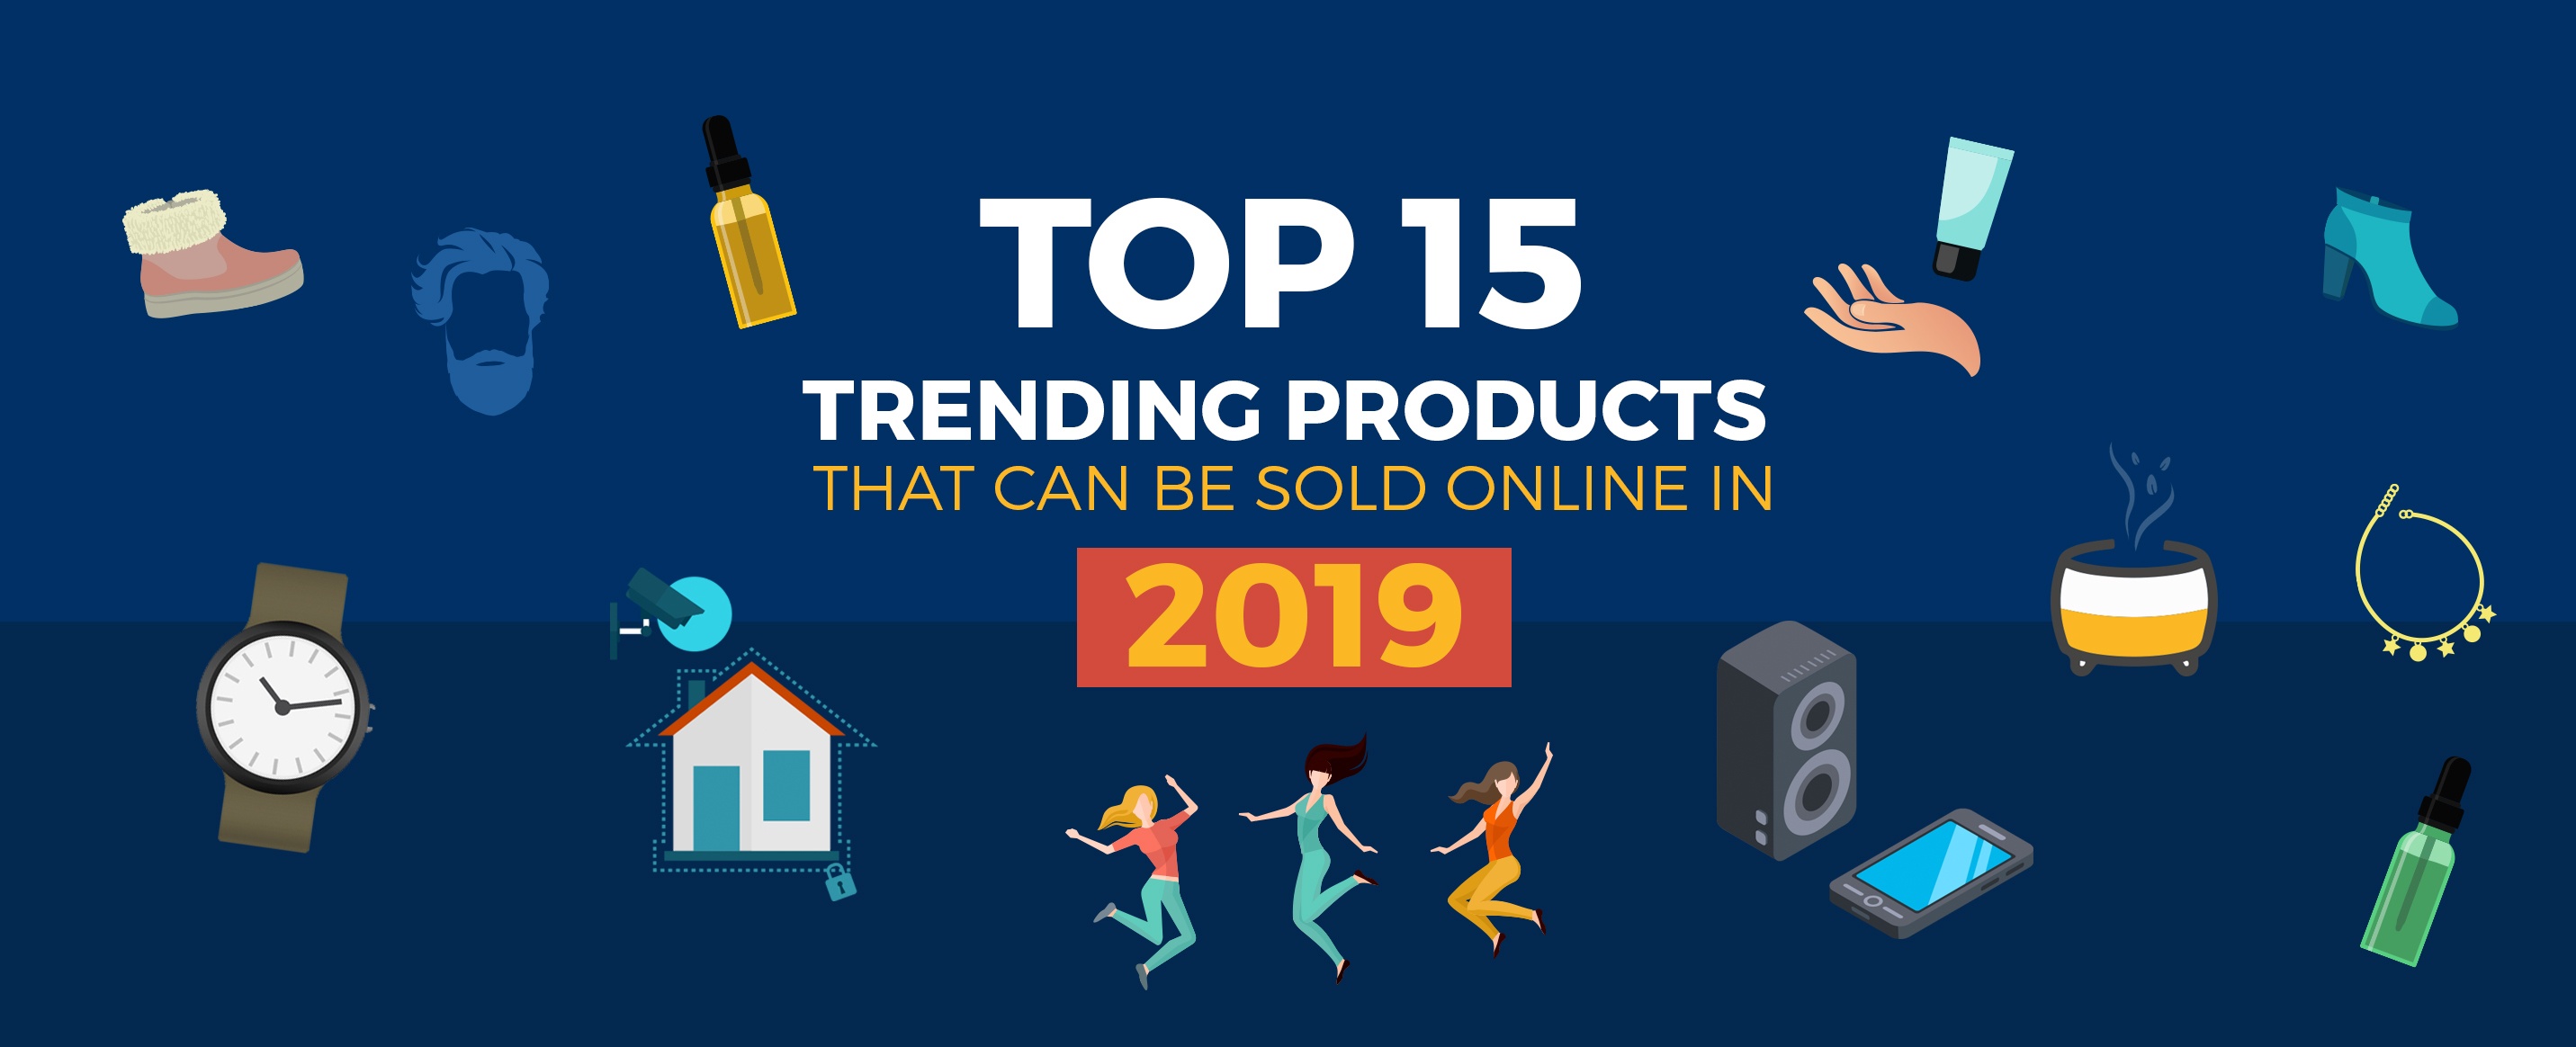 Top 15 Trending Products That Can be Sold Online in 2019